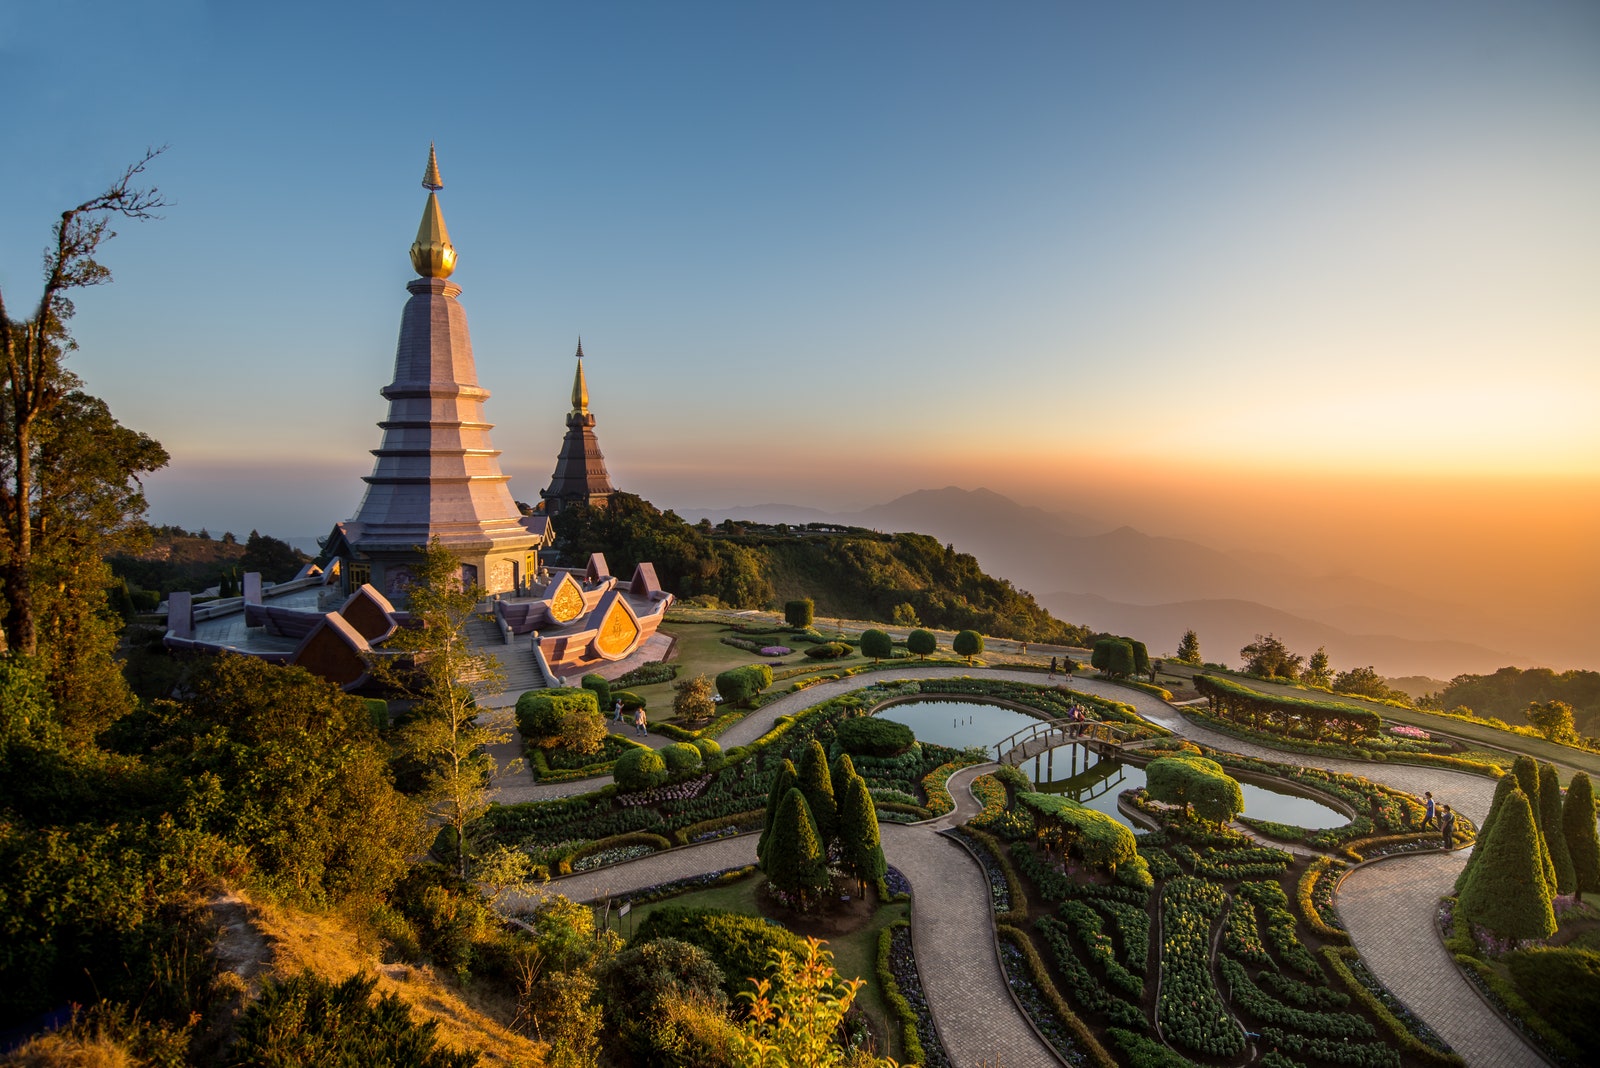 Worldwide Adventure Quiz 🌍: What Does Your Future Look Like? Chiang Mai, Thailand